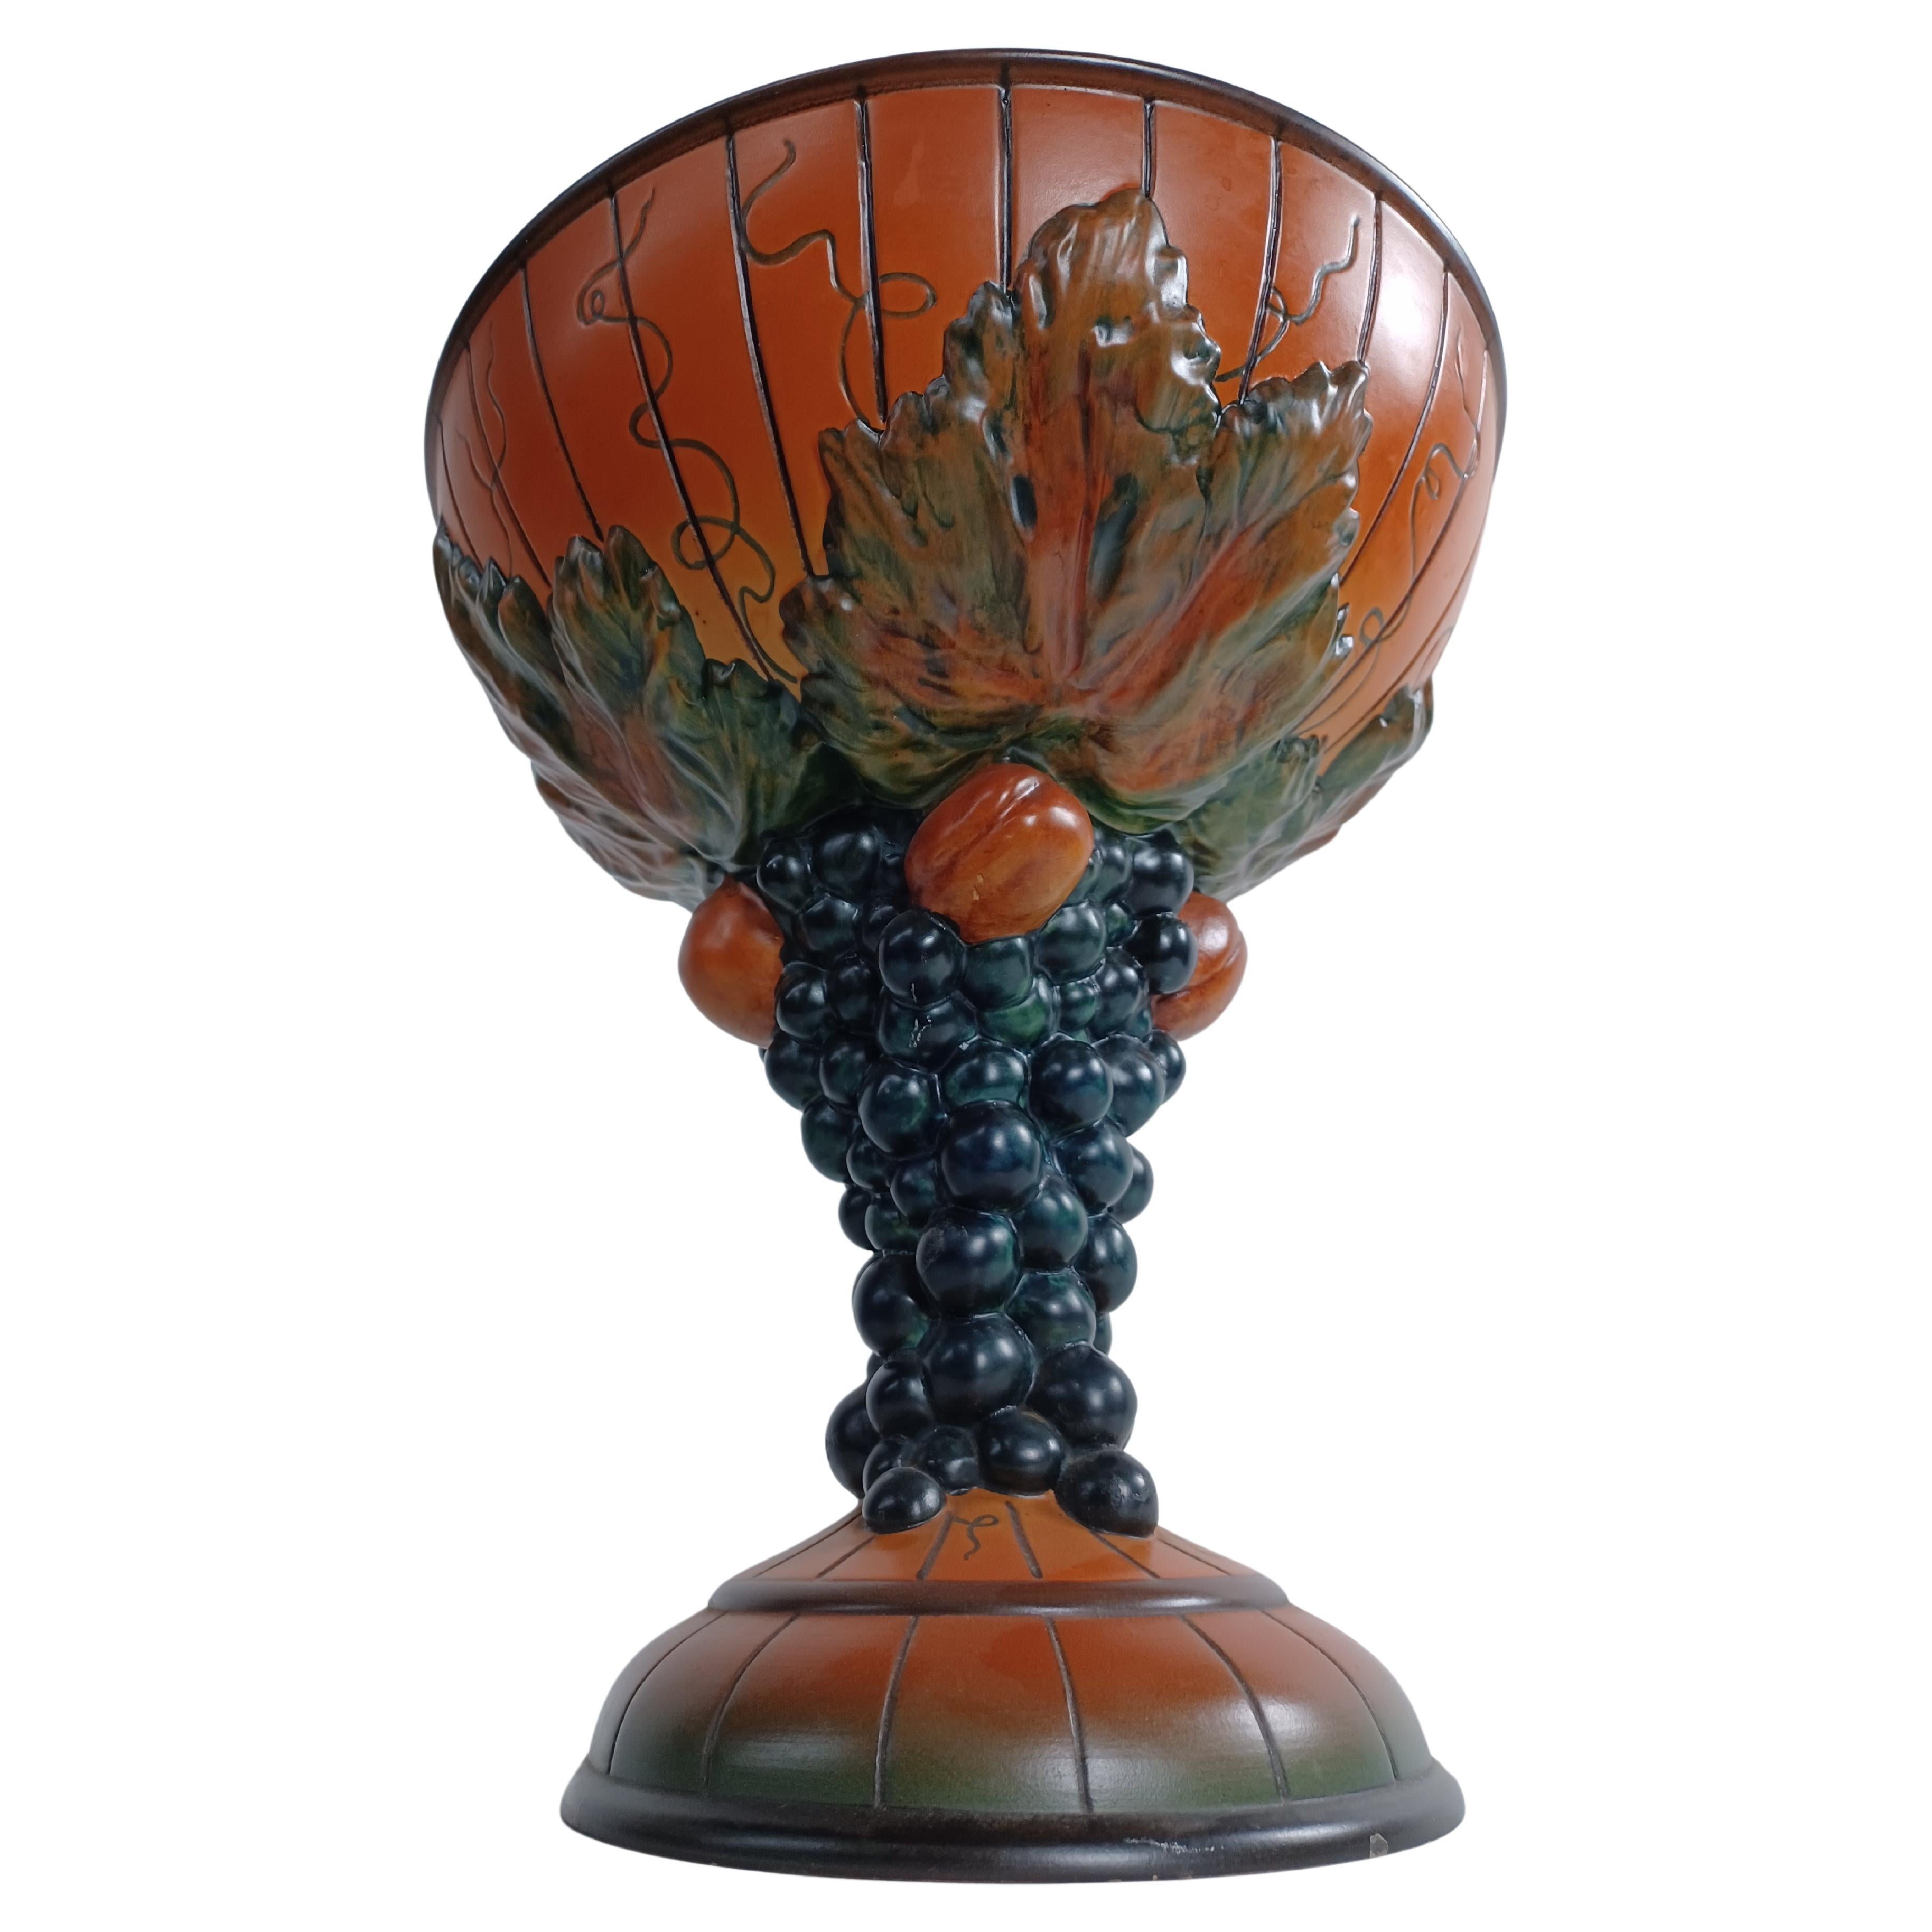 1920´s Art Nouveau Grape Decorated Bowl by Erik Magnussen for P. Ipsens Enke

The rare hand-crafted art nouveau fruit bowl was designed by Erik Magnussen  in 1927 and feature pillar of maturing grapes together with 4 wallnuts  supporting a large